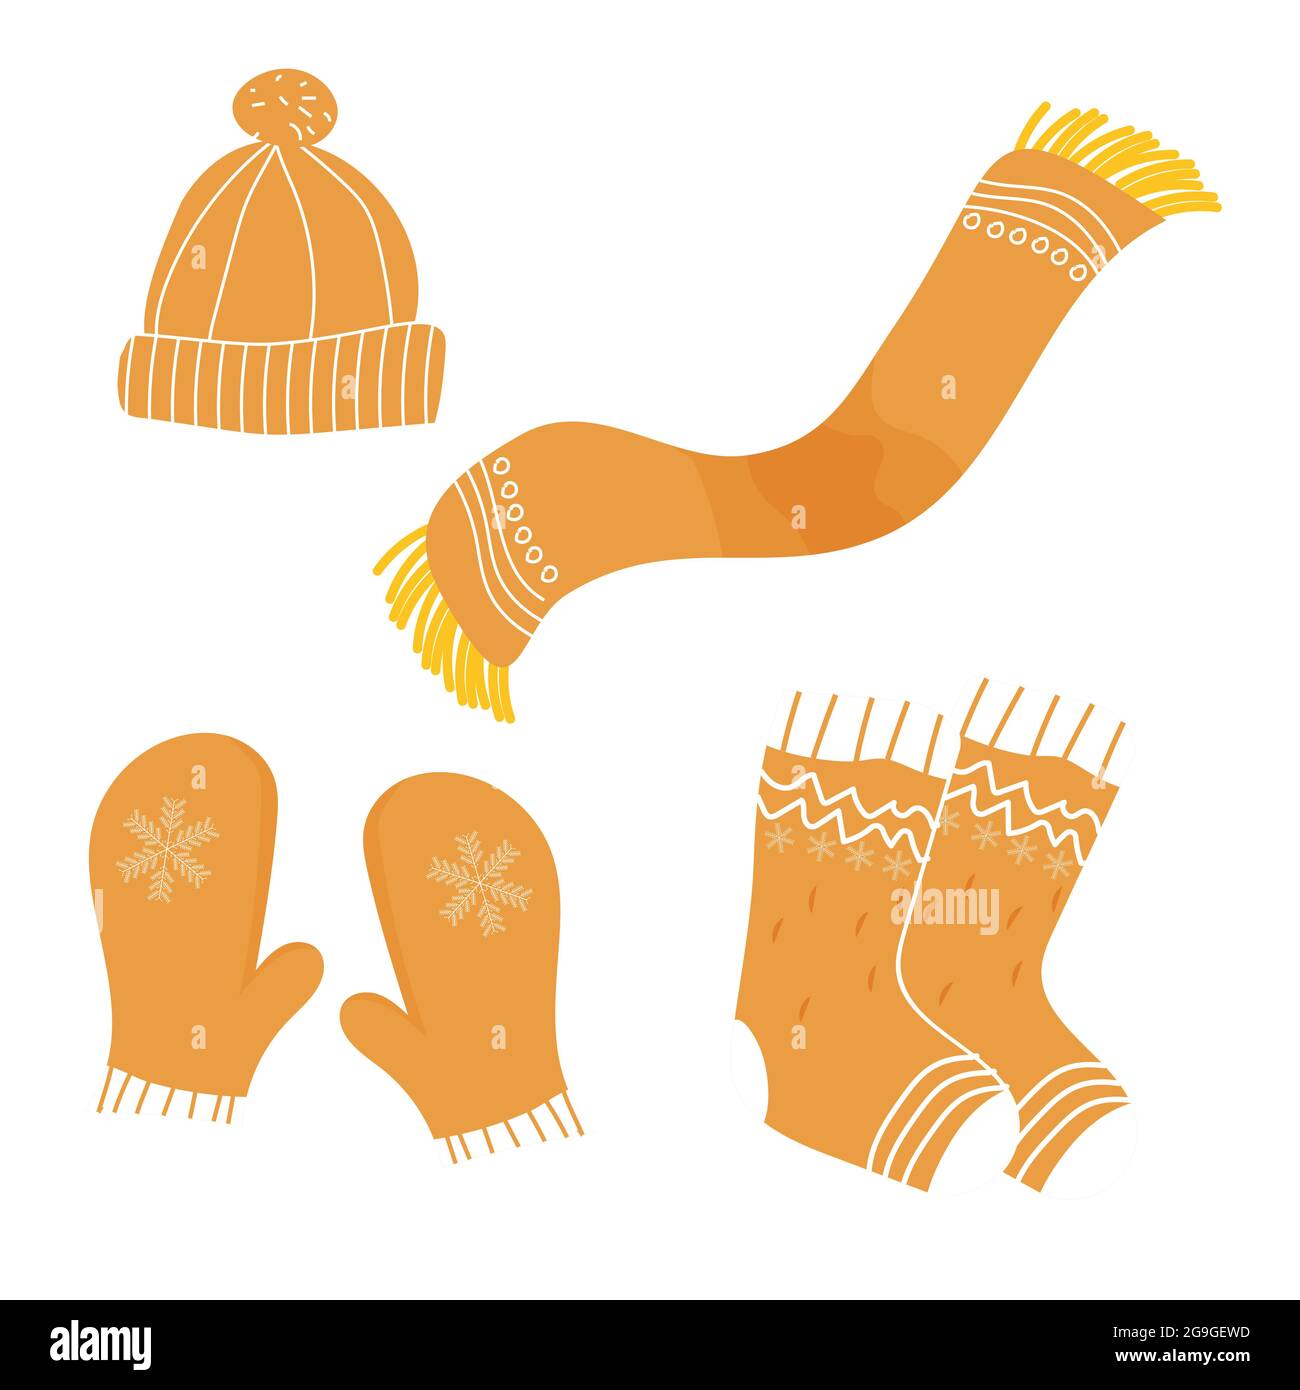 Set of warm winter knitted clothes hat, gloves, socks and scarf decorated with free hand ornament, Scandinavian style isolated on white background. Stylish design elements collection. Vector illustration Stock Vector